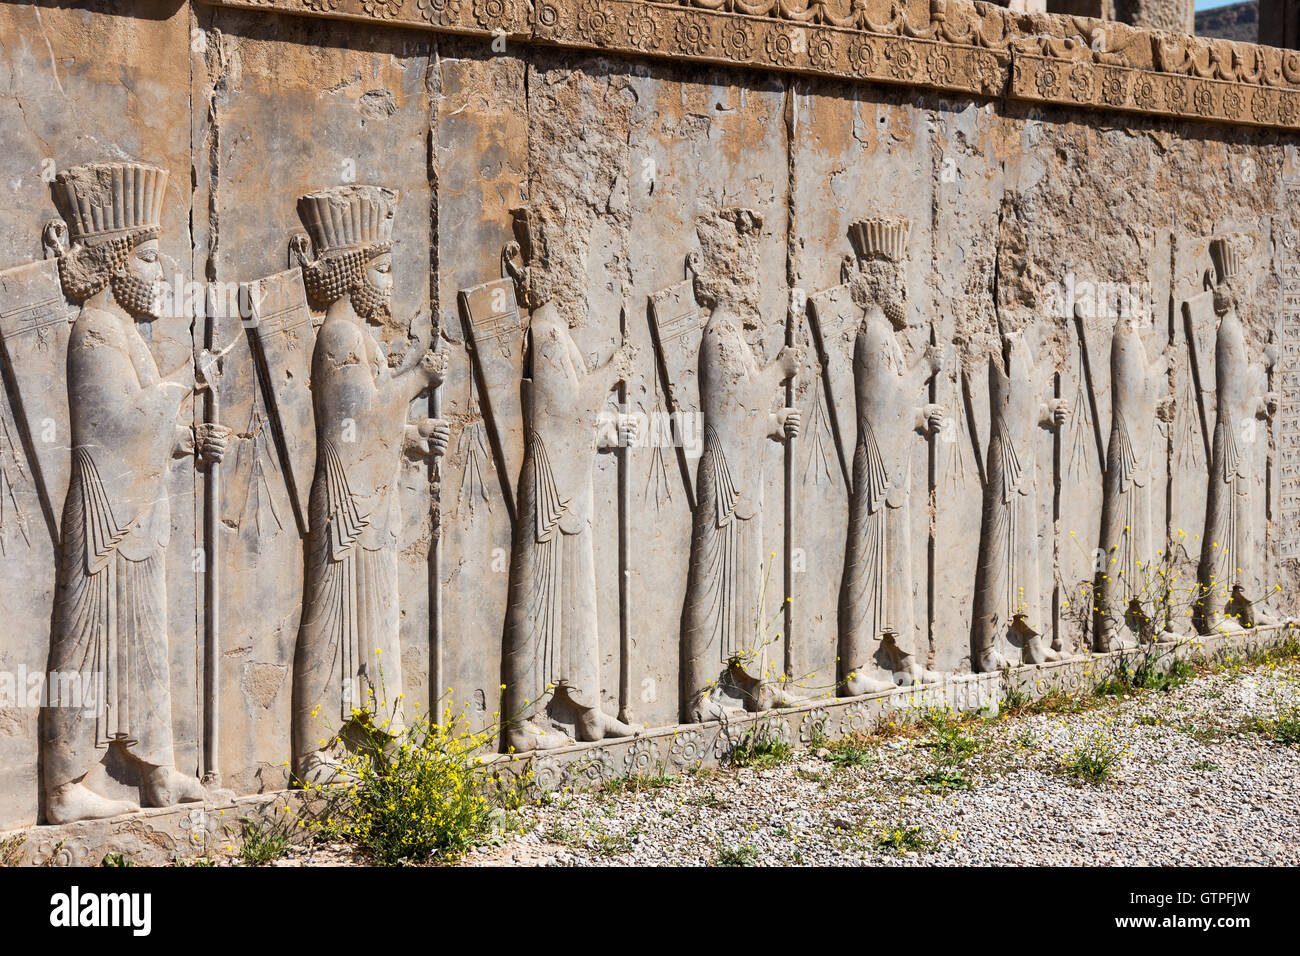 Persepolis literally meaning 